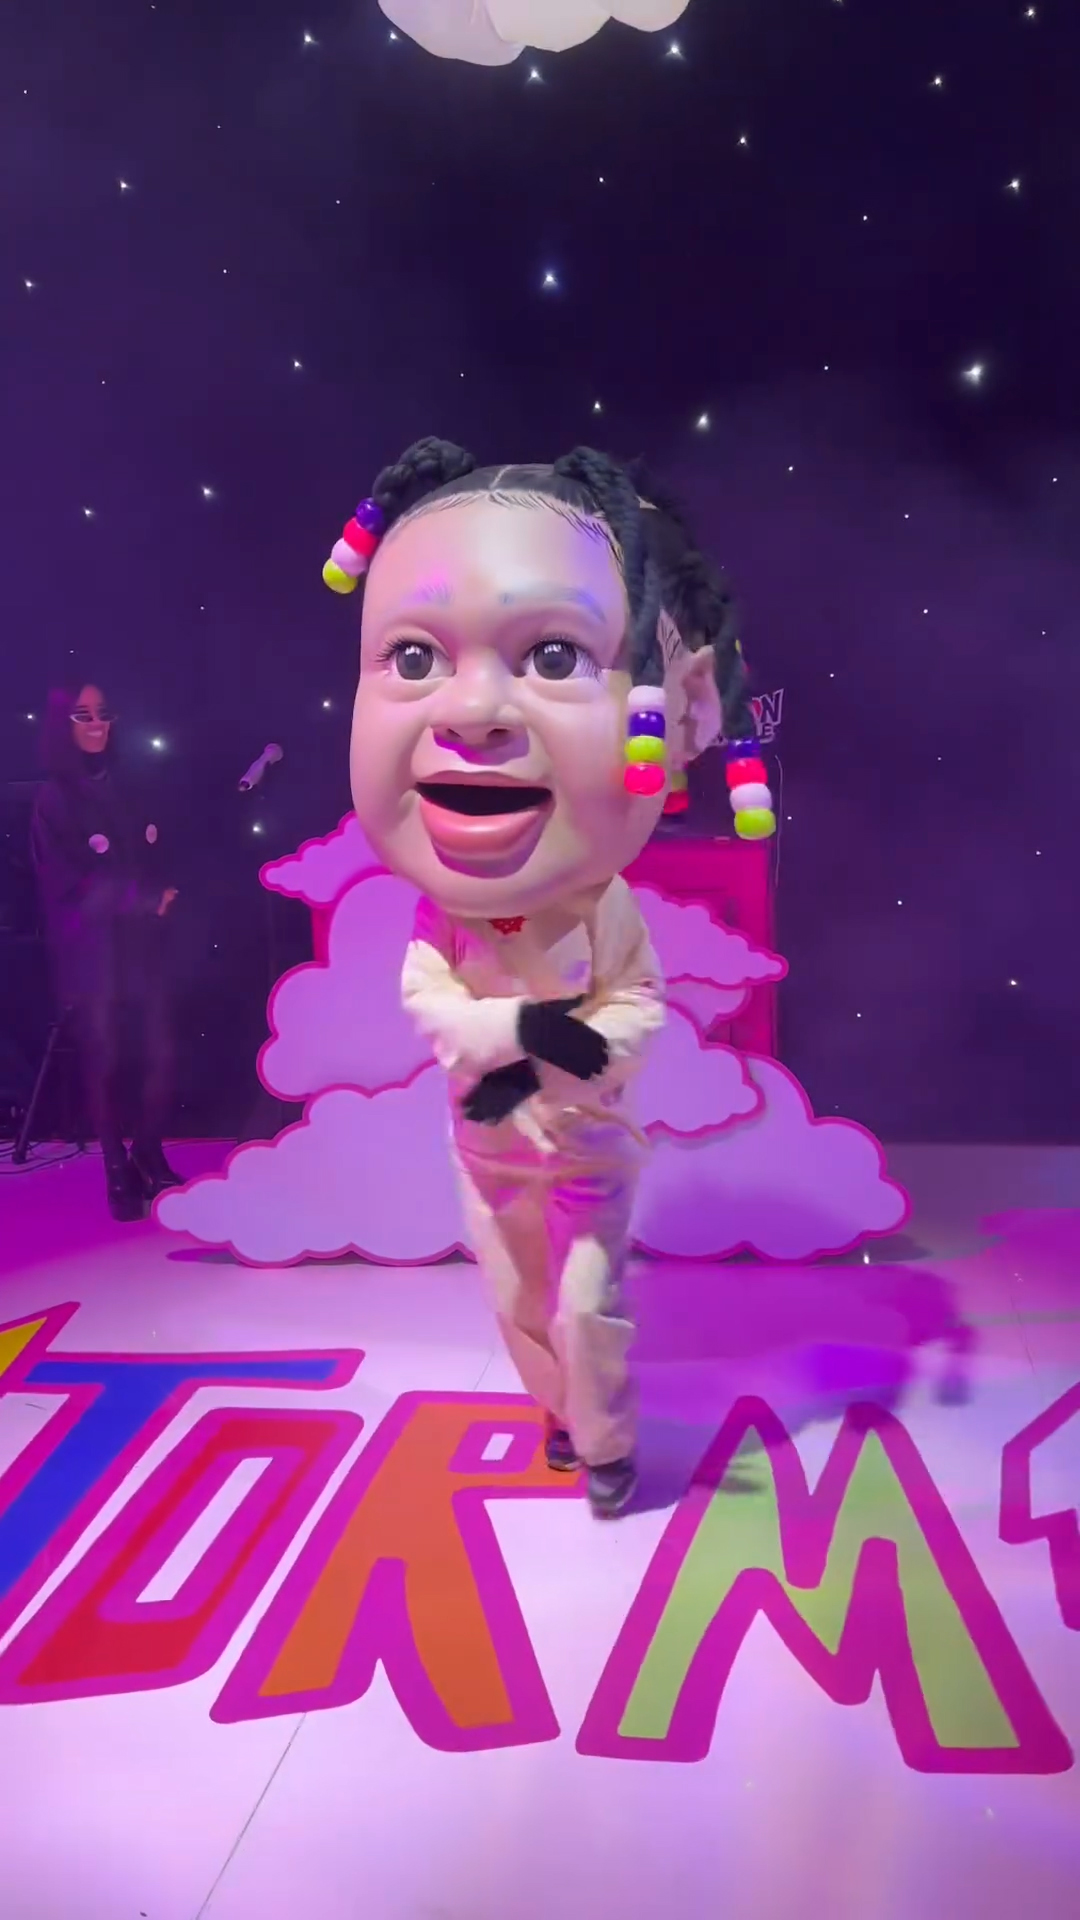 She hired entertainers to wear huge blowup Stormi heads and dance for guests